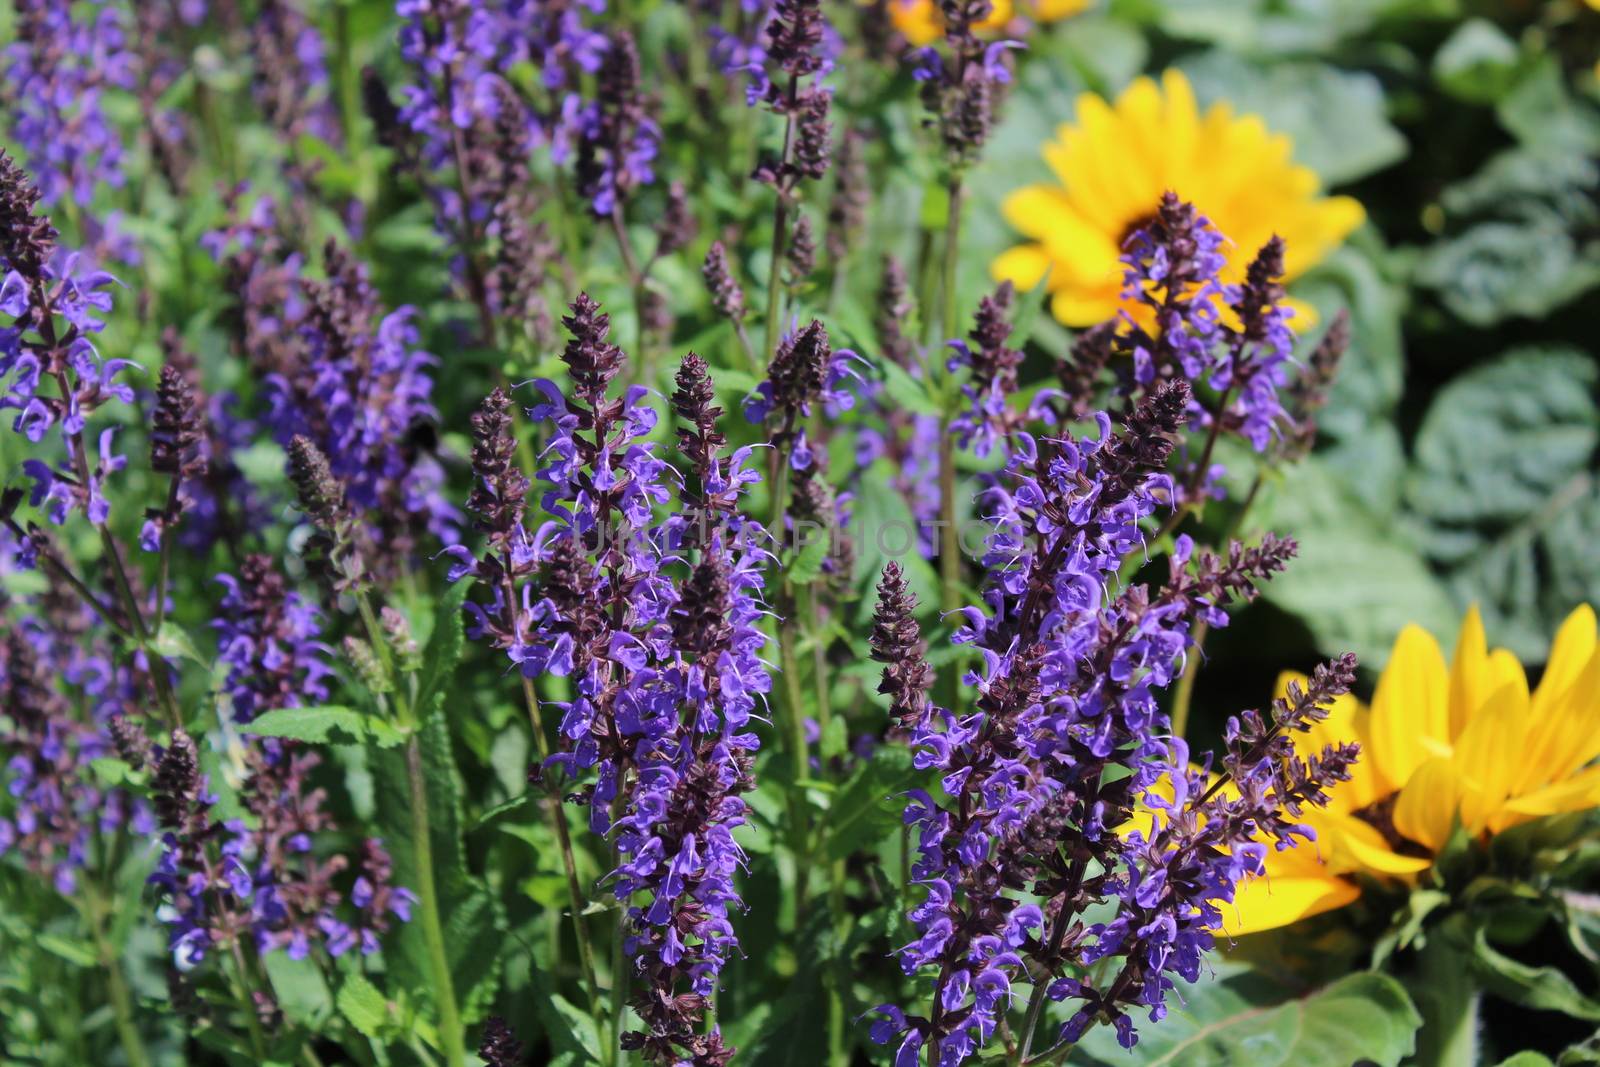 The picture shows blossoming catmint in the garden